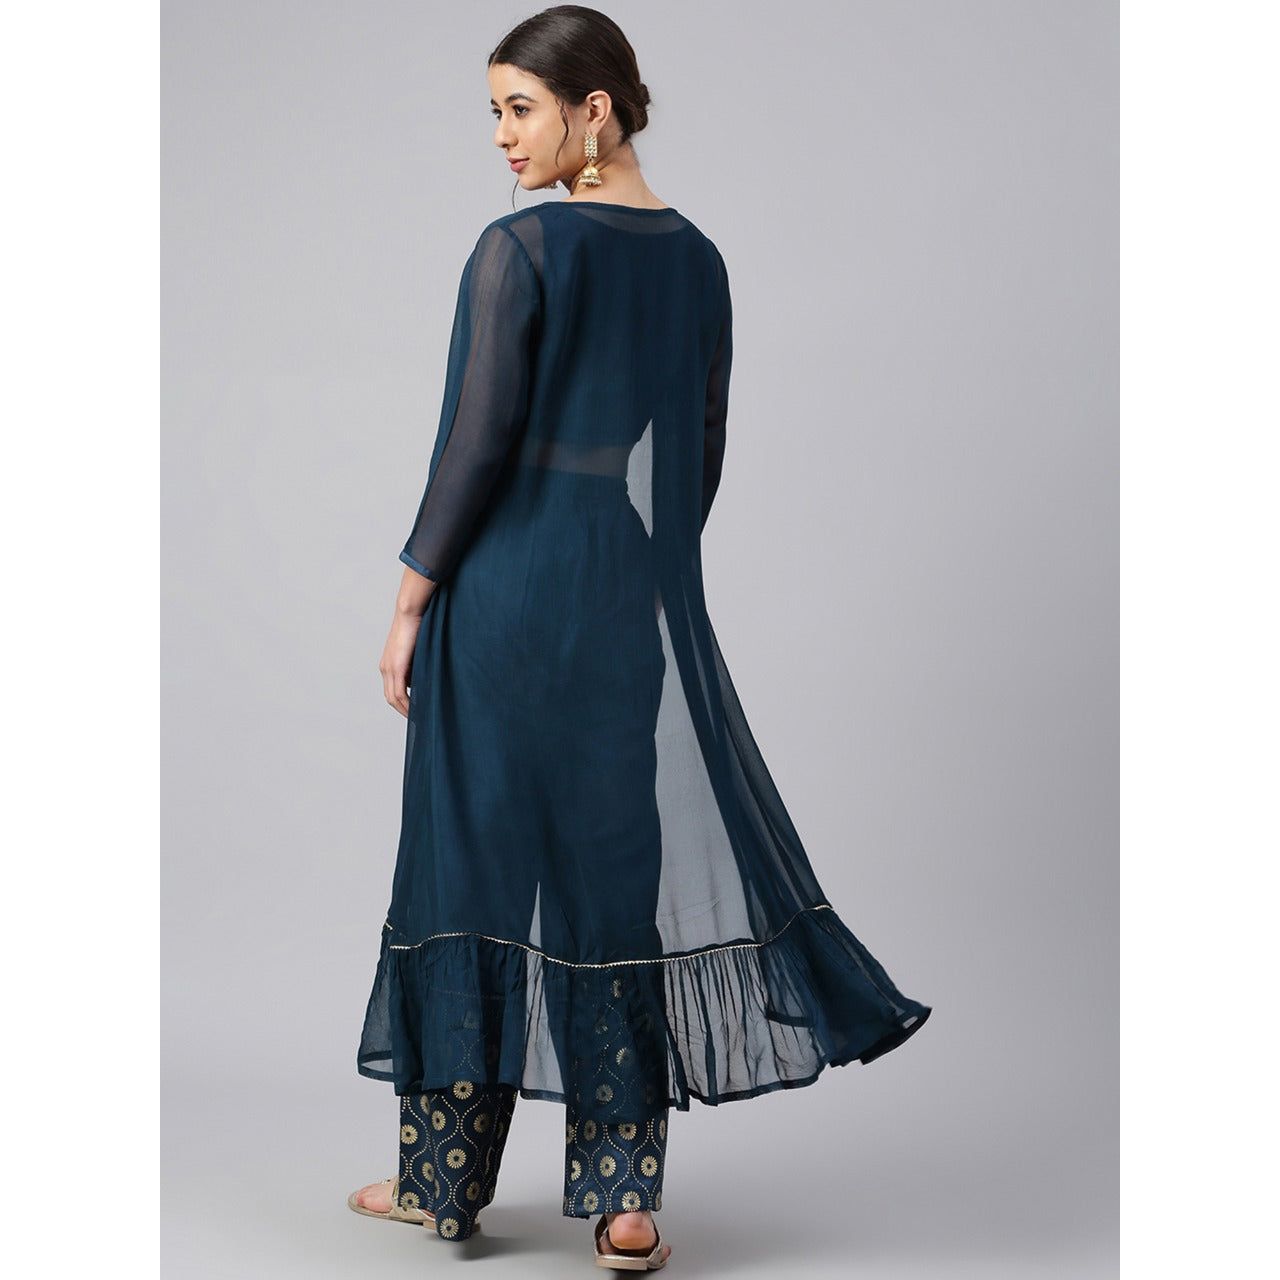 Embroidered Ethnic Sleeveless Crop Top Style Kurta Kurti With Printed  Palazzo Pants And Printed Jacket Shrug at Rs 1151.00 | Palazzo Suit | ID:  25242203788